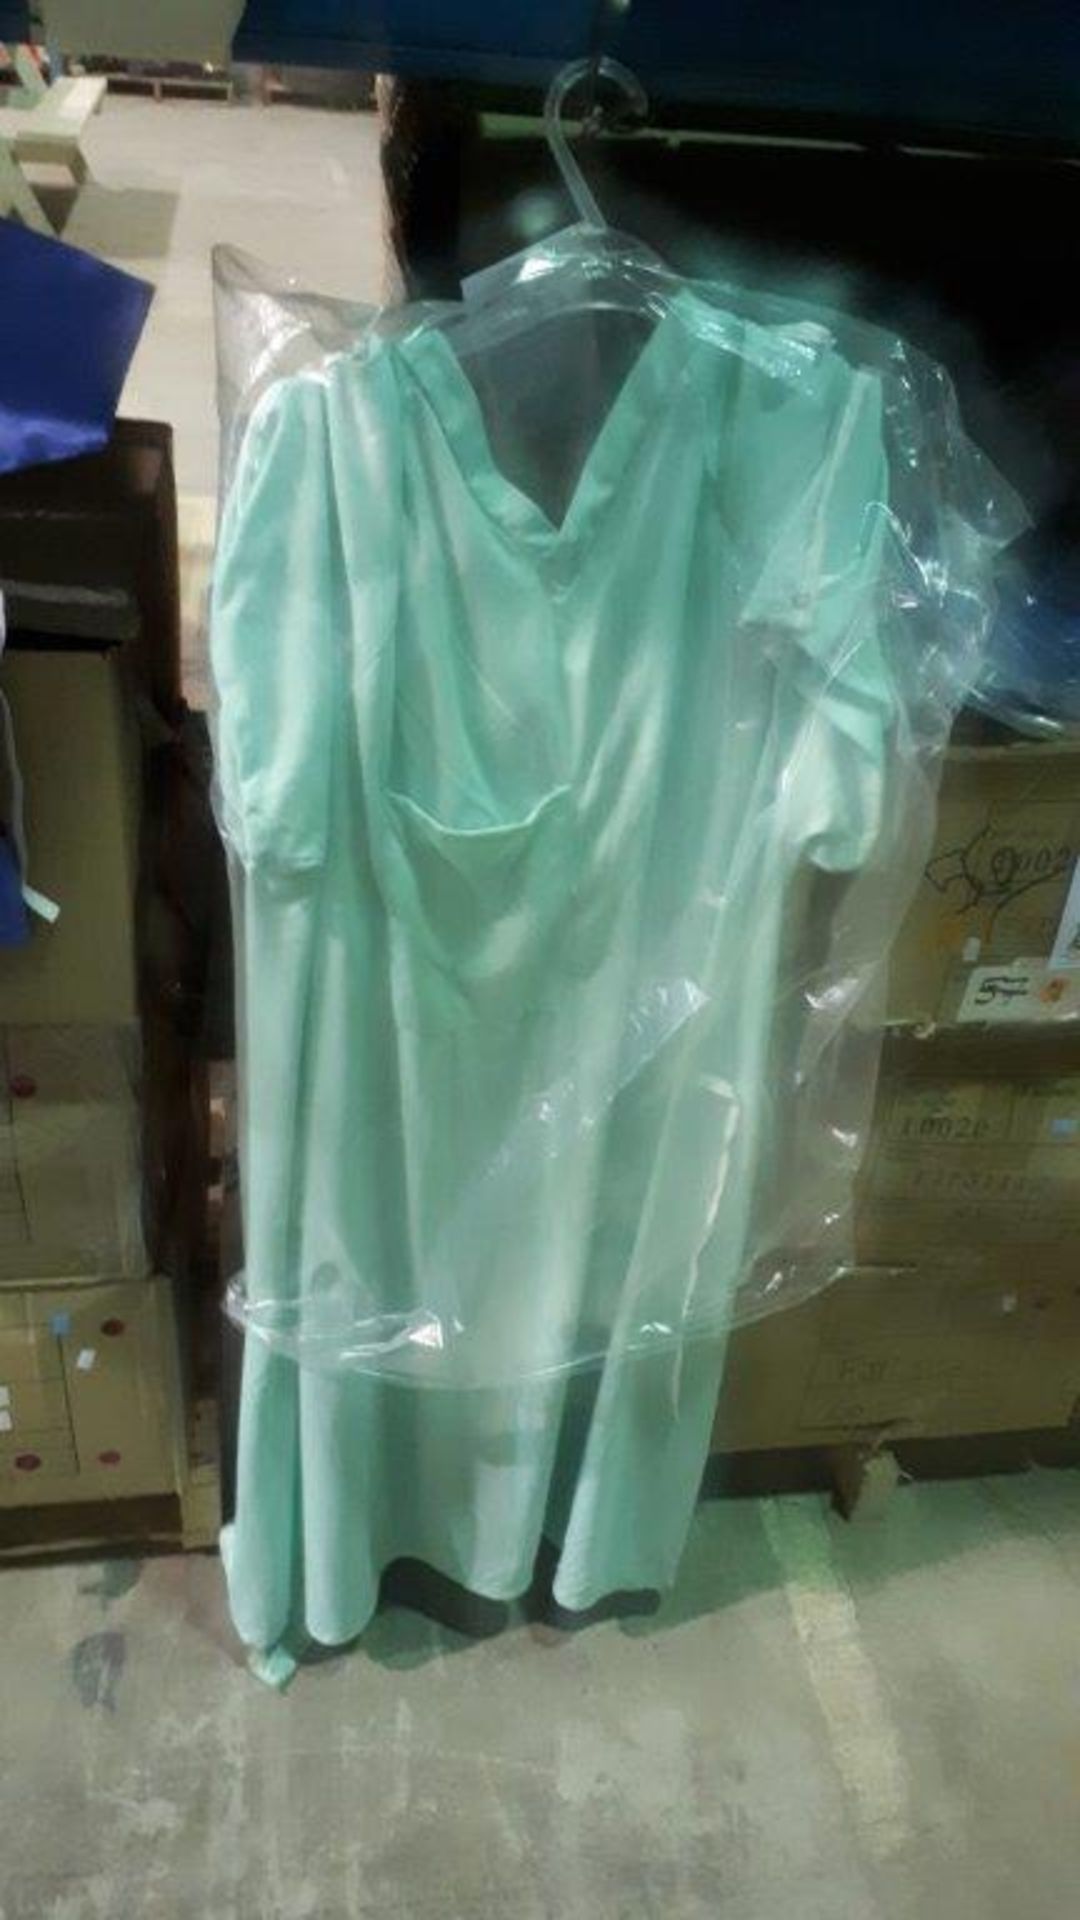 Telemetry hospital gowns,green,one size (2 boxes)